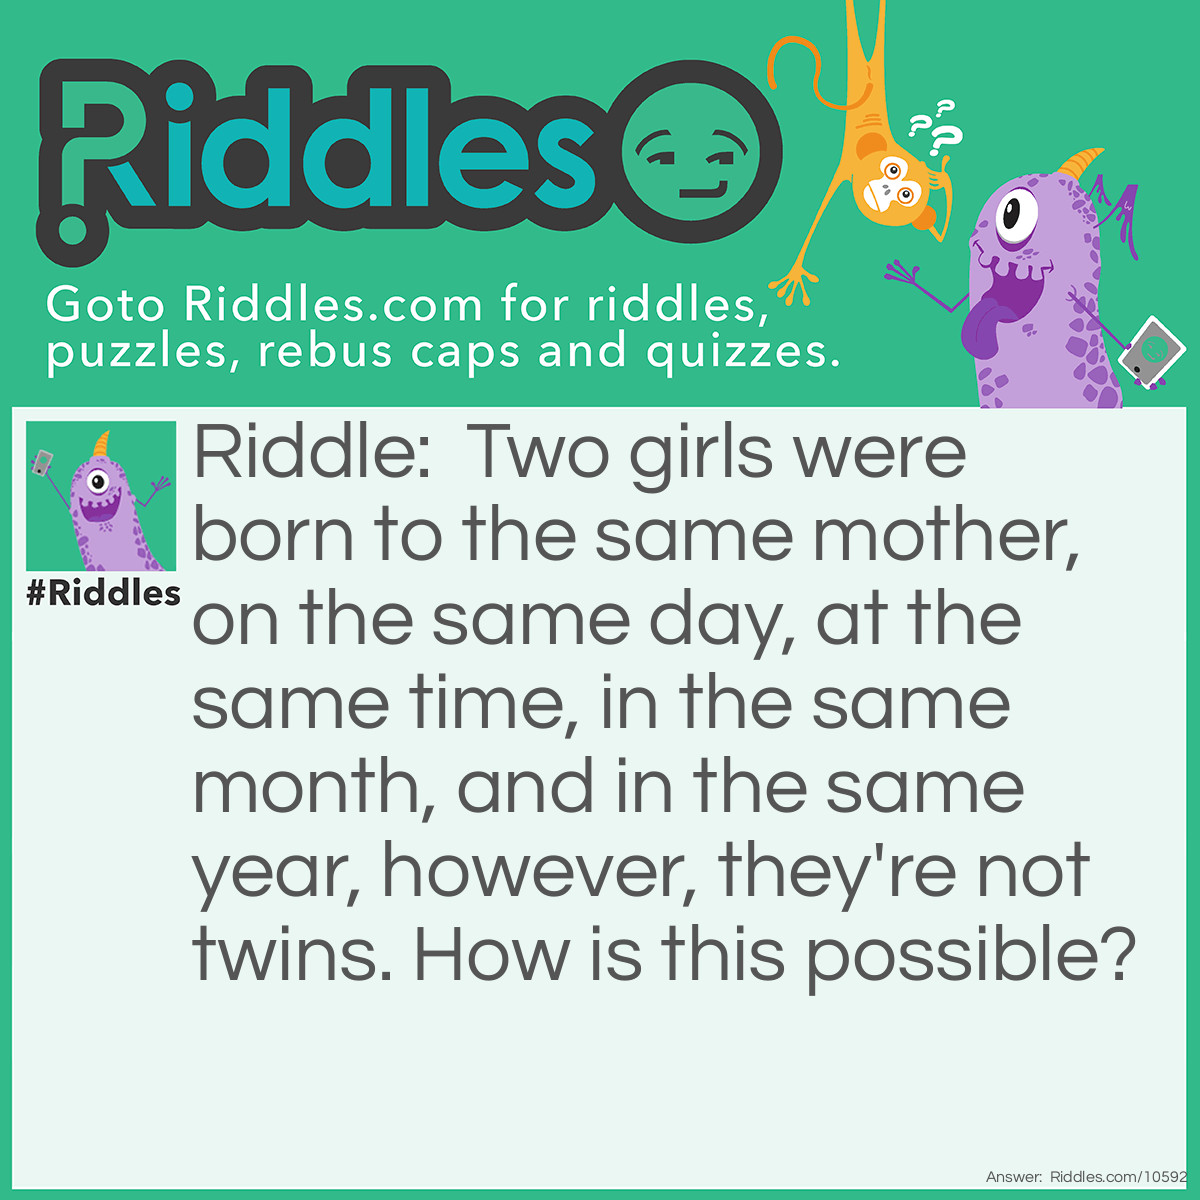 Riddle: Two girls were born to the same mother, on the same day, at the same time, in the same month, and in the same year, however, they're not twins. How is this possible? Answer: The two girls are a part of a set of triplets.